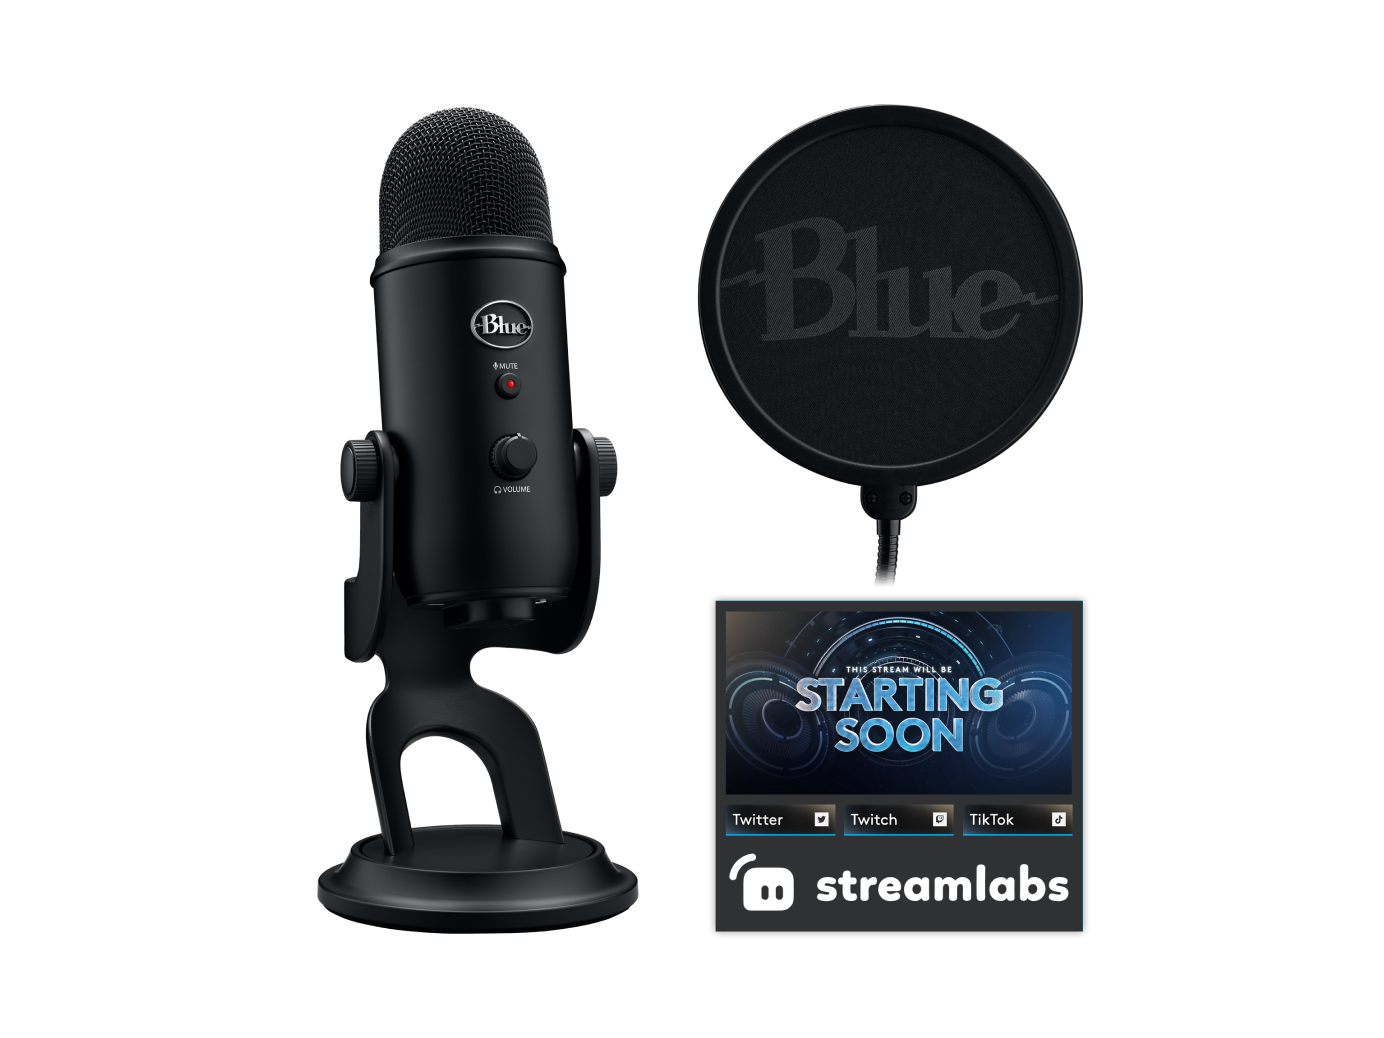 Image of YETI GAME STREAMING KIT Premium Streaming Kit with Yeti, Streamlabs Themes and Pop Filter